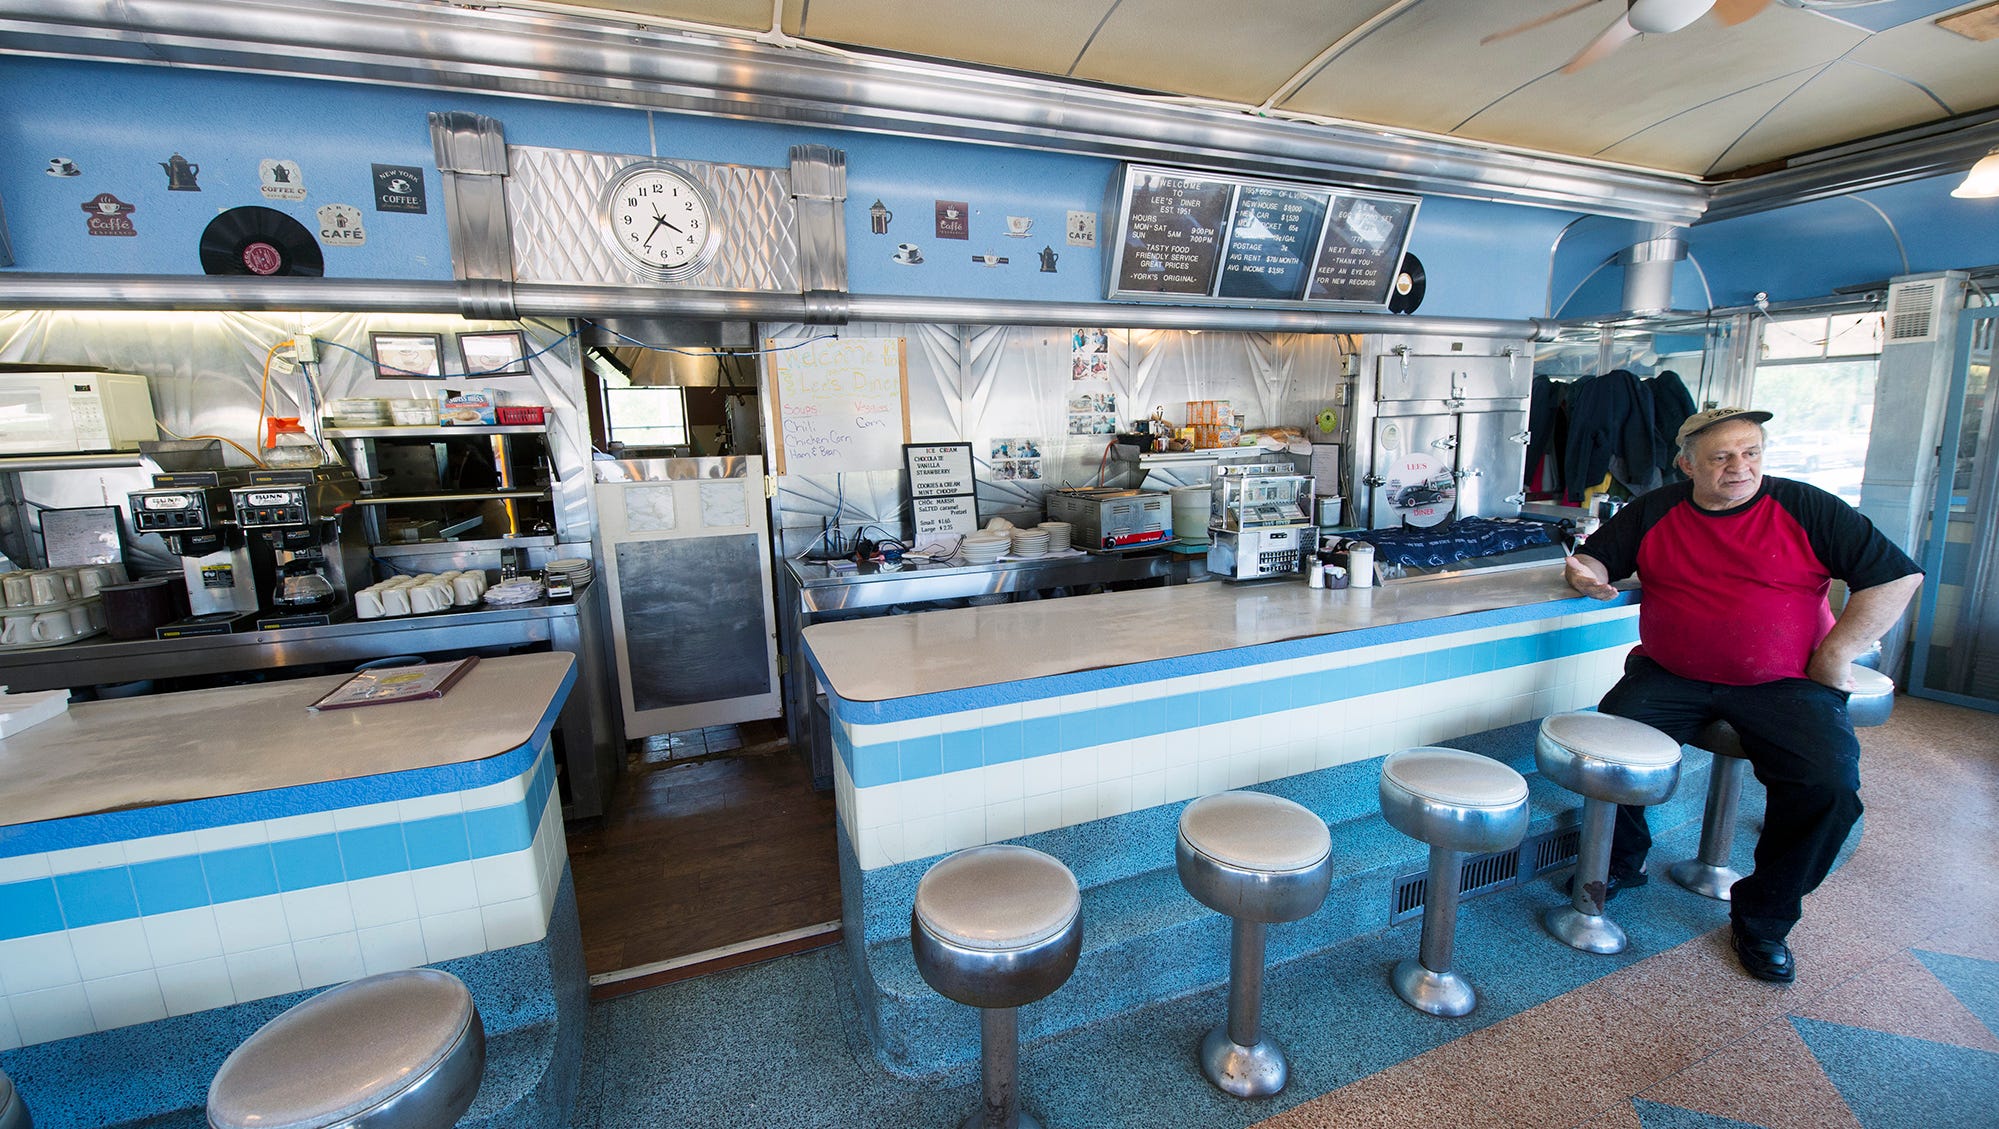 Lee's Diner at dangerous crossroads of nostalgia and modern expectations